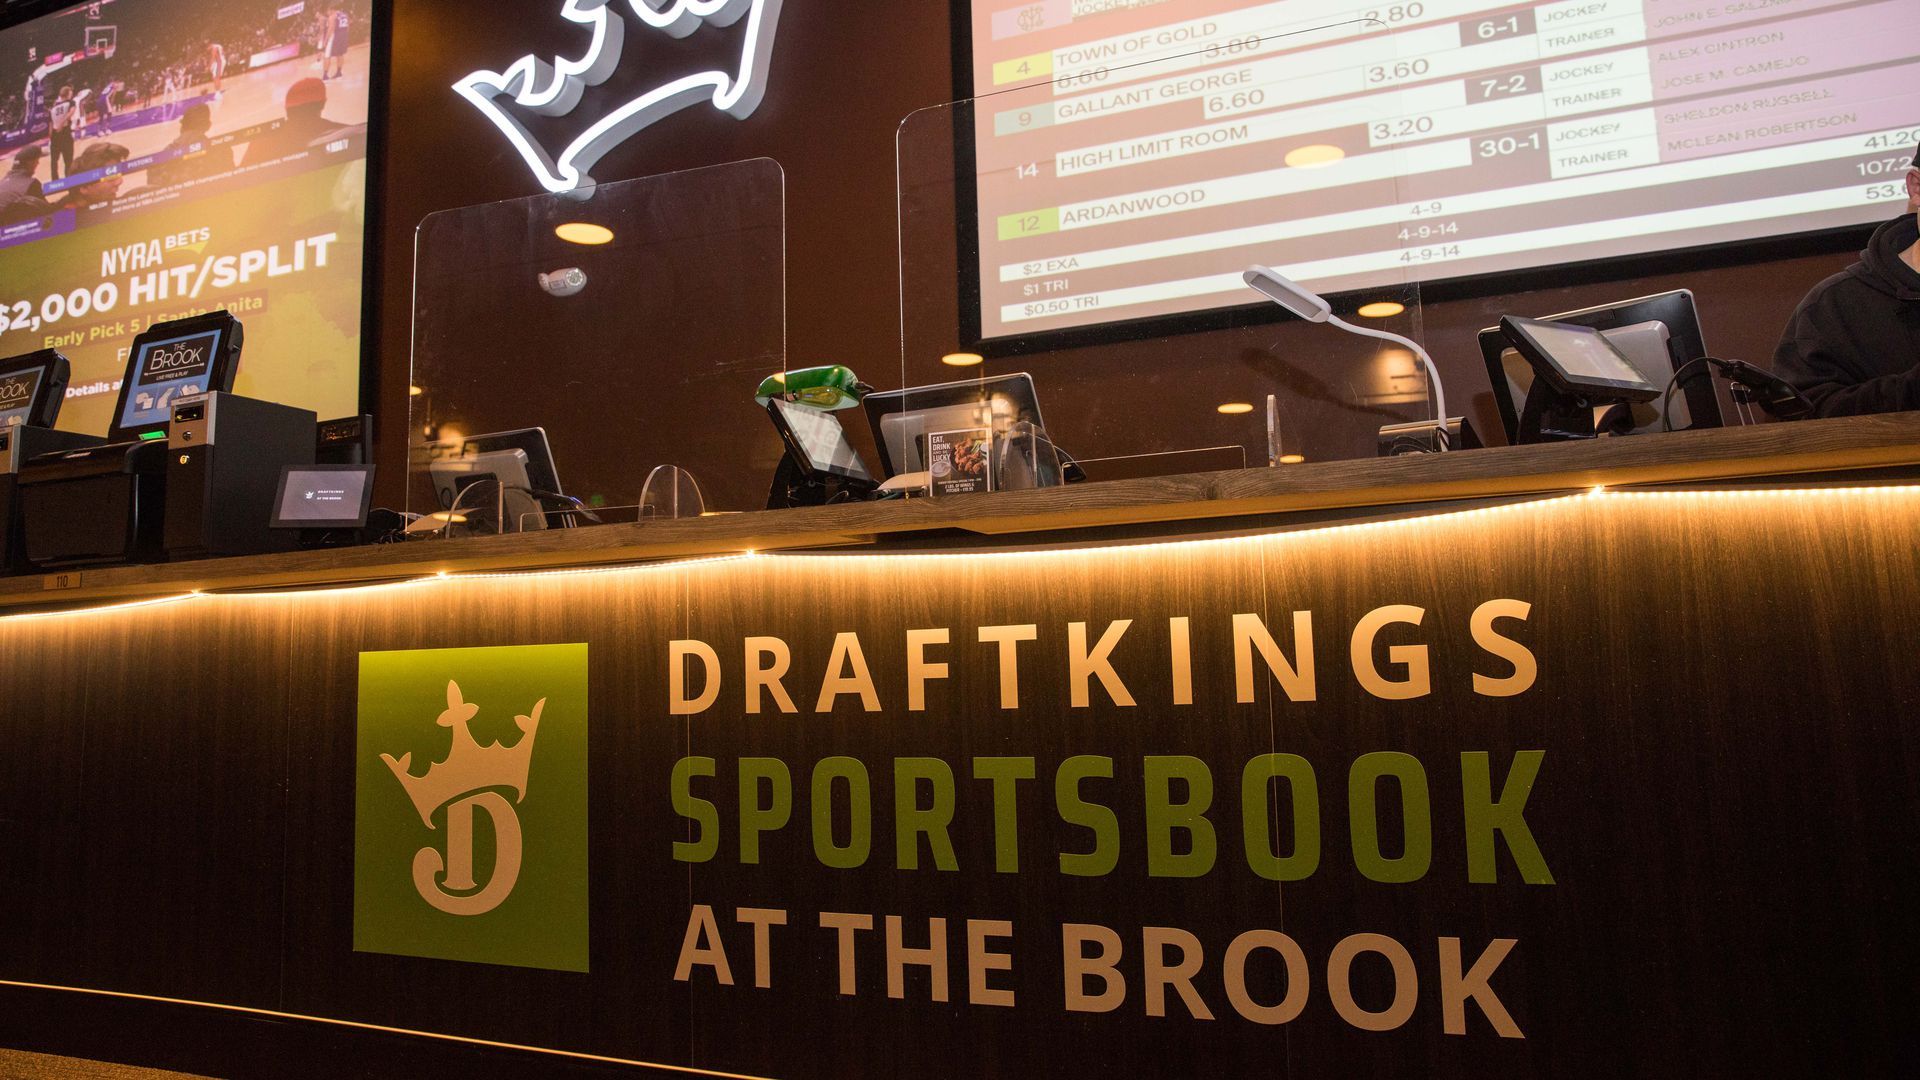 A Draftkings booth